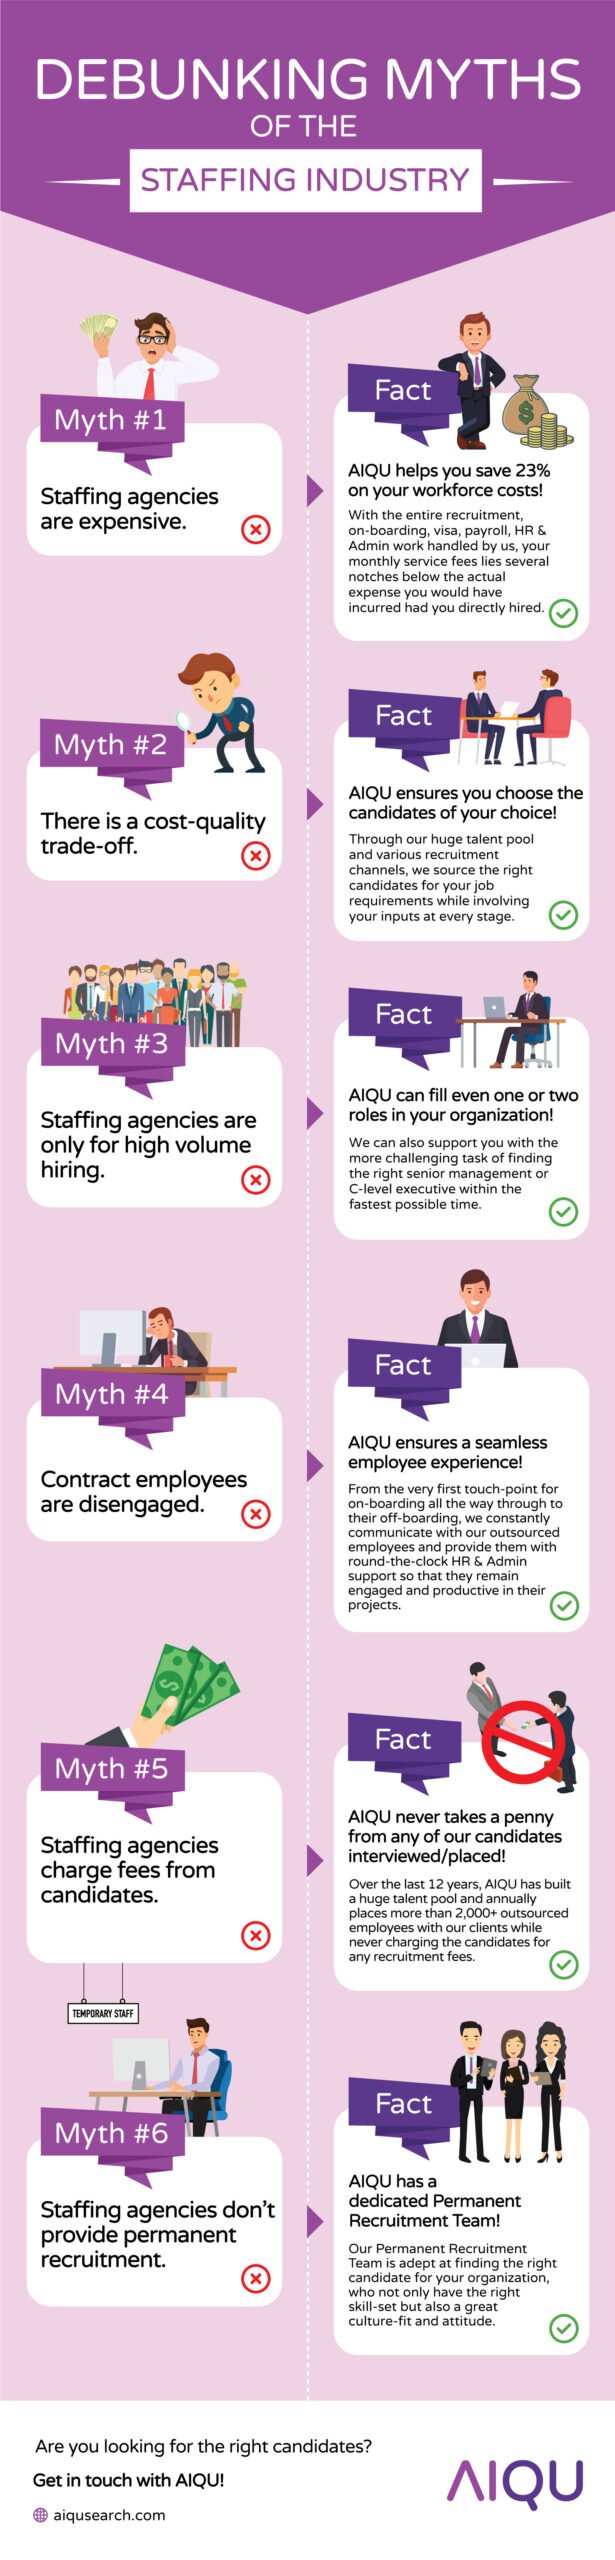 MYTHS OF THE IT STAFFING INDUSTRY